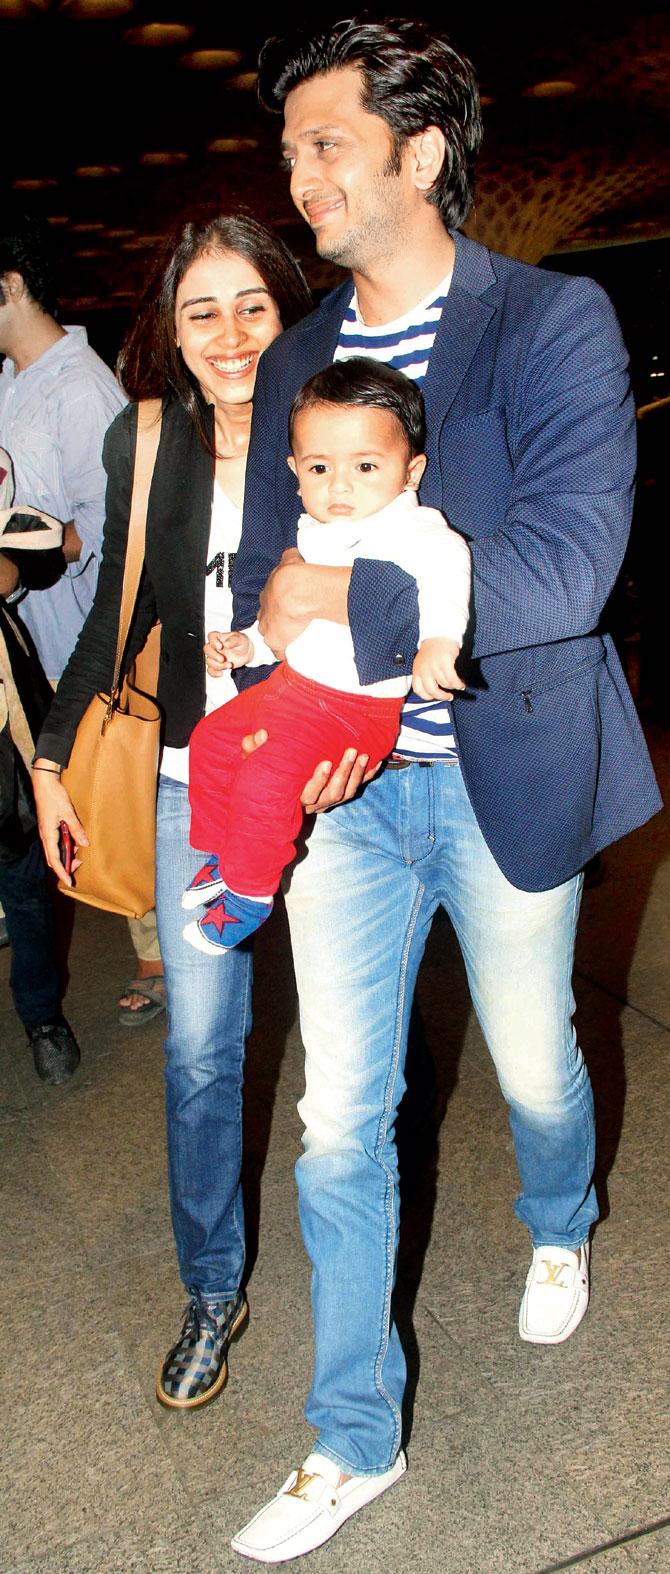 Riteish Deshmukh and Genelia D’Souza were all smiles with their adorable bundle of joy, son Riaan